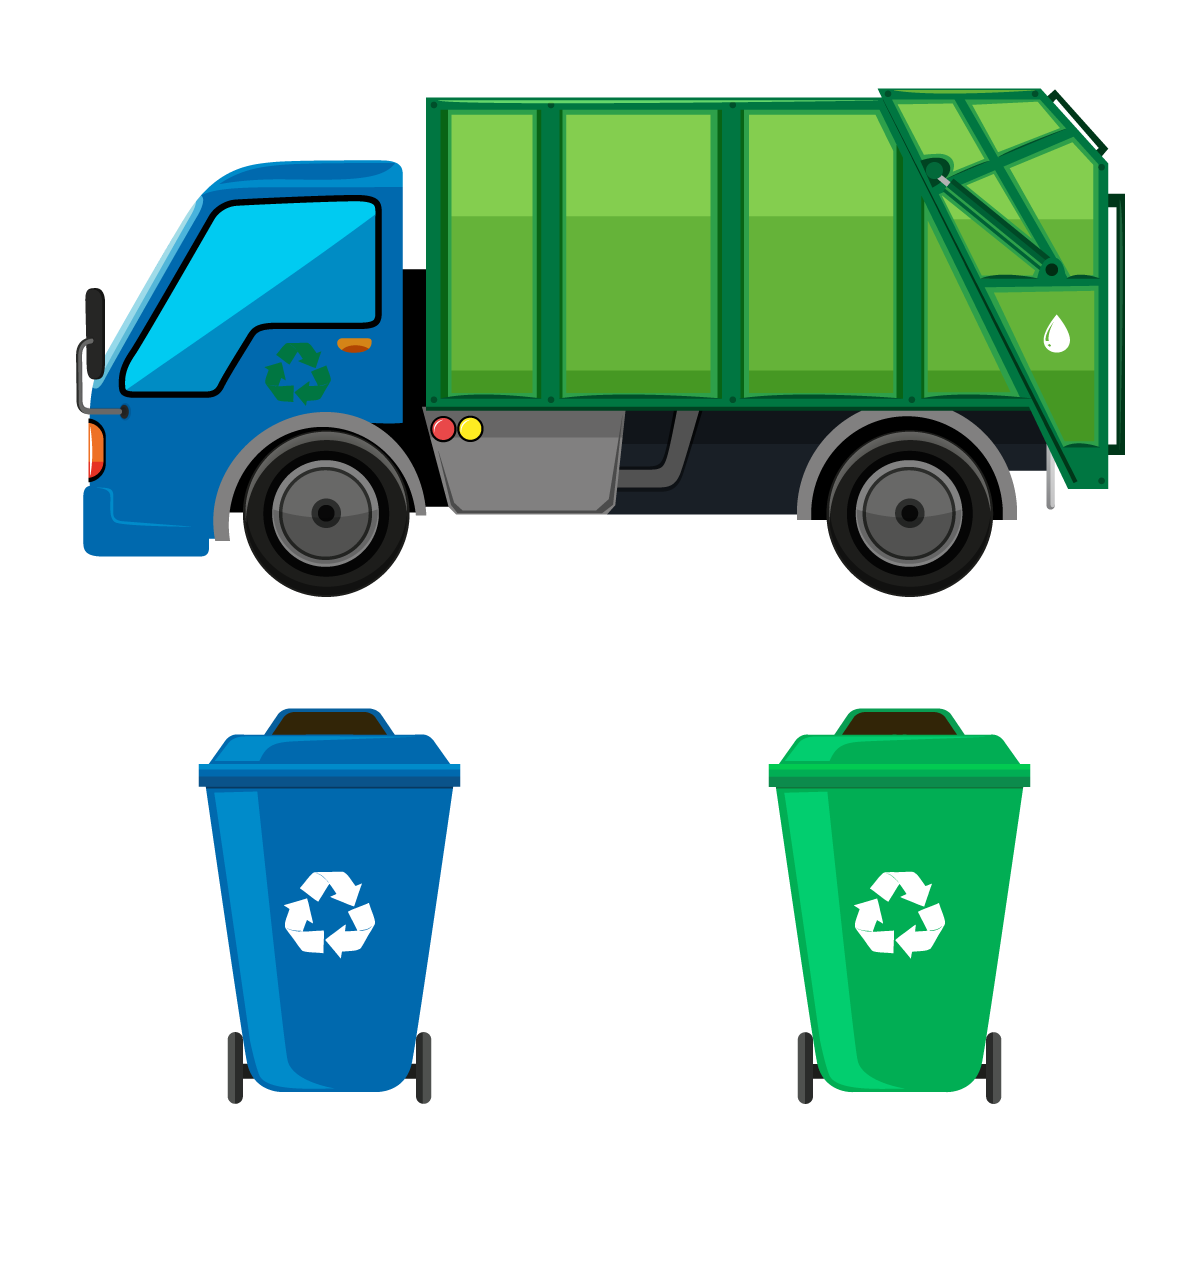 Garbage Collection Truck Motor Vehicle Green Waste PNG Image